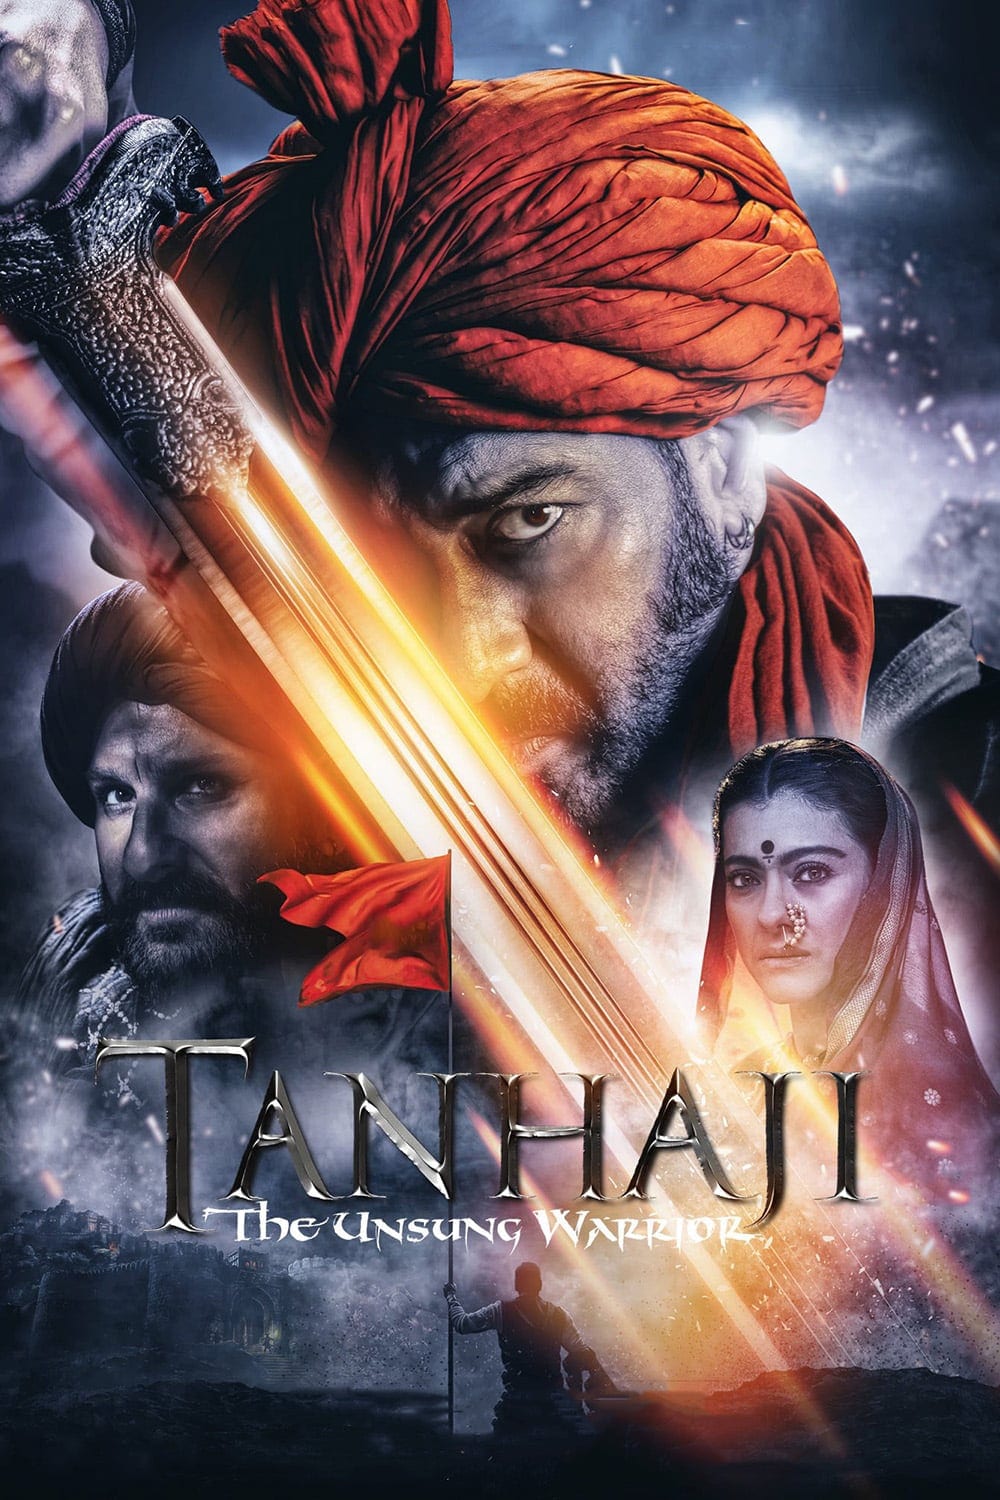 Poster for the movie "Tanhaji: The Unsung Warrior"